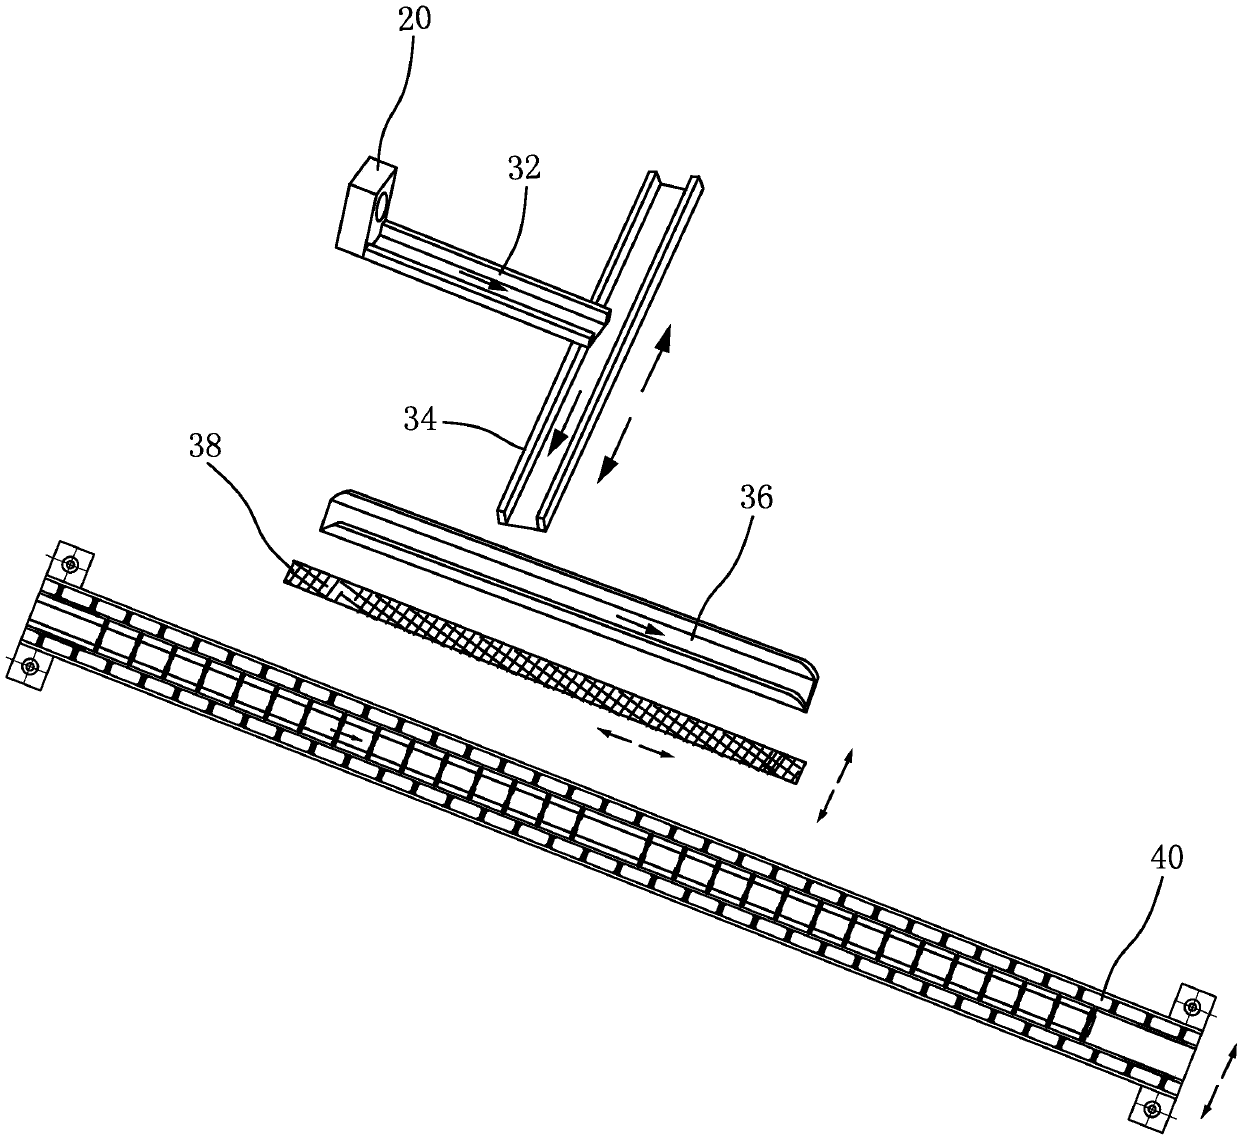 A concrete distribution and conveying system